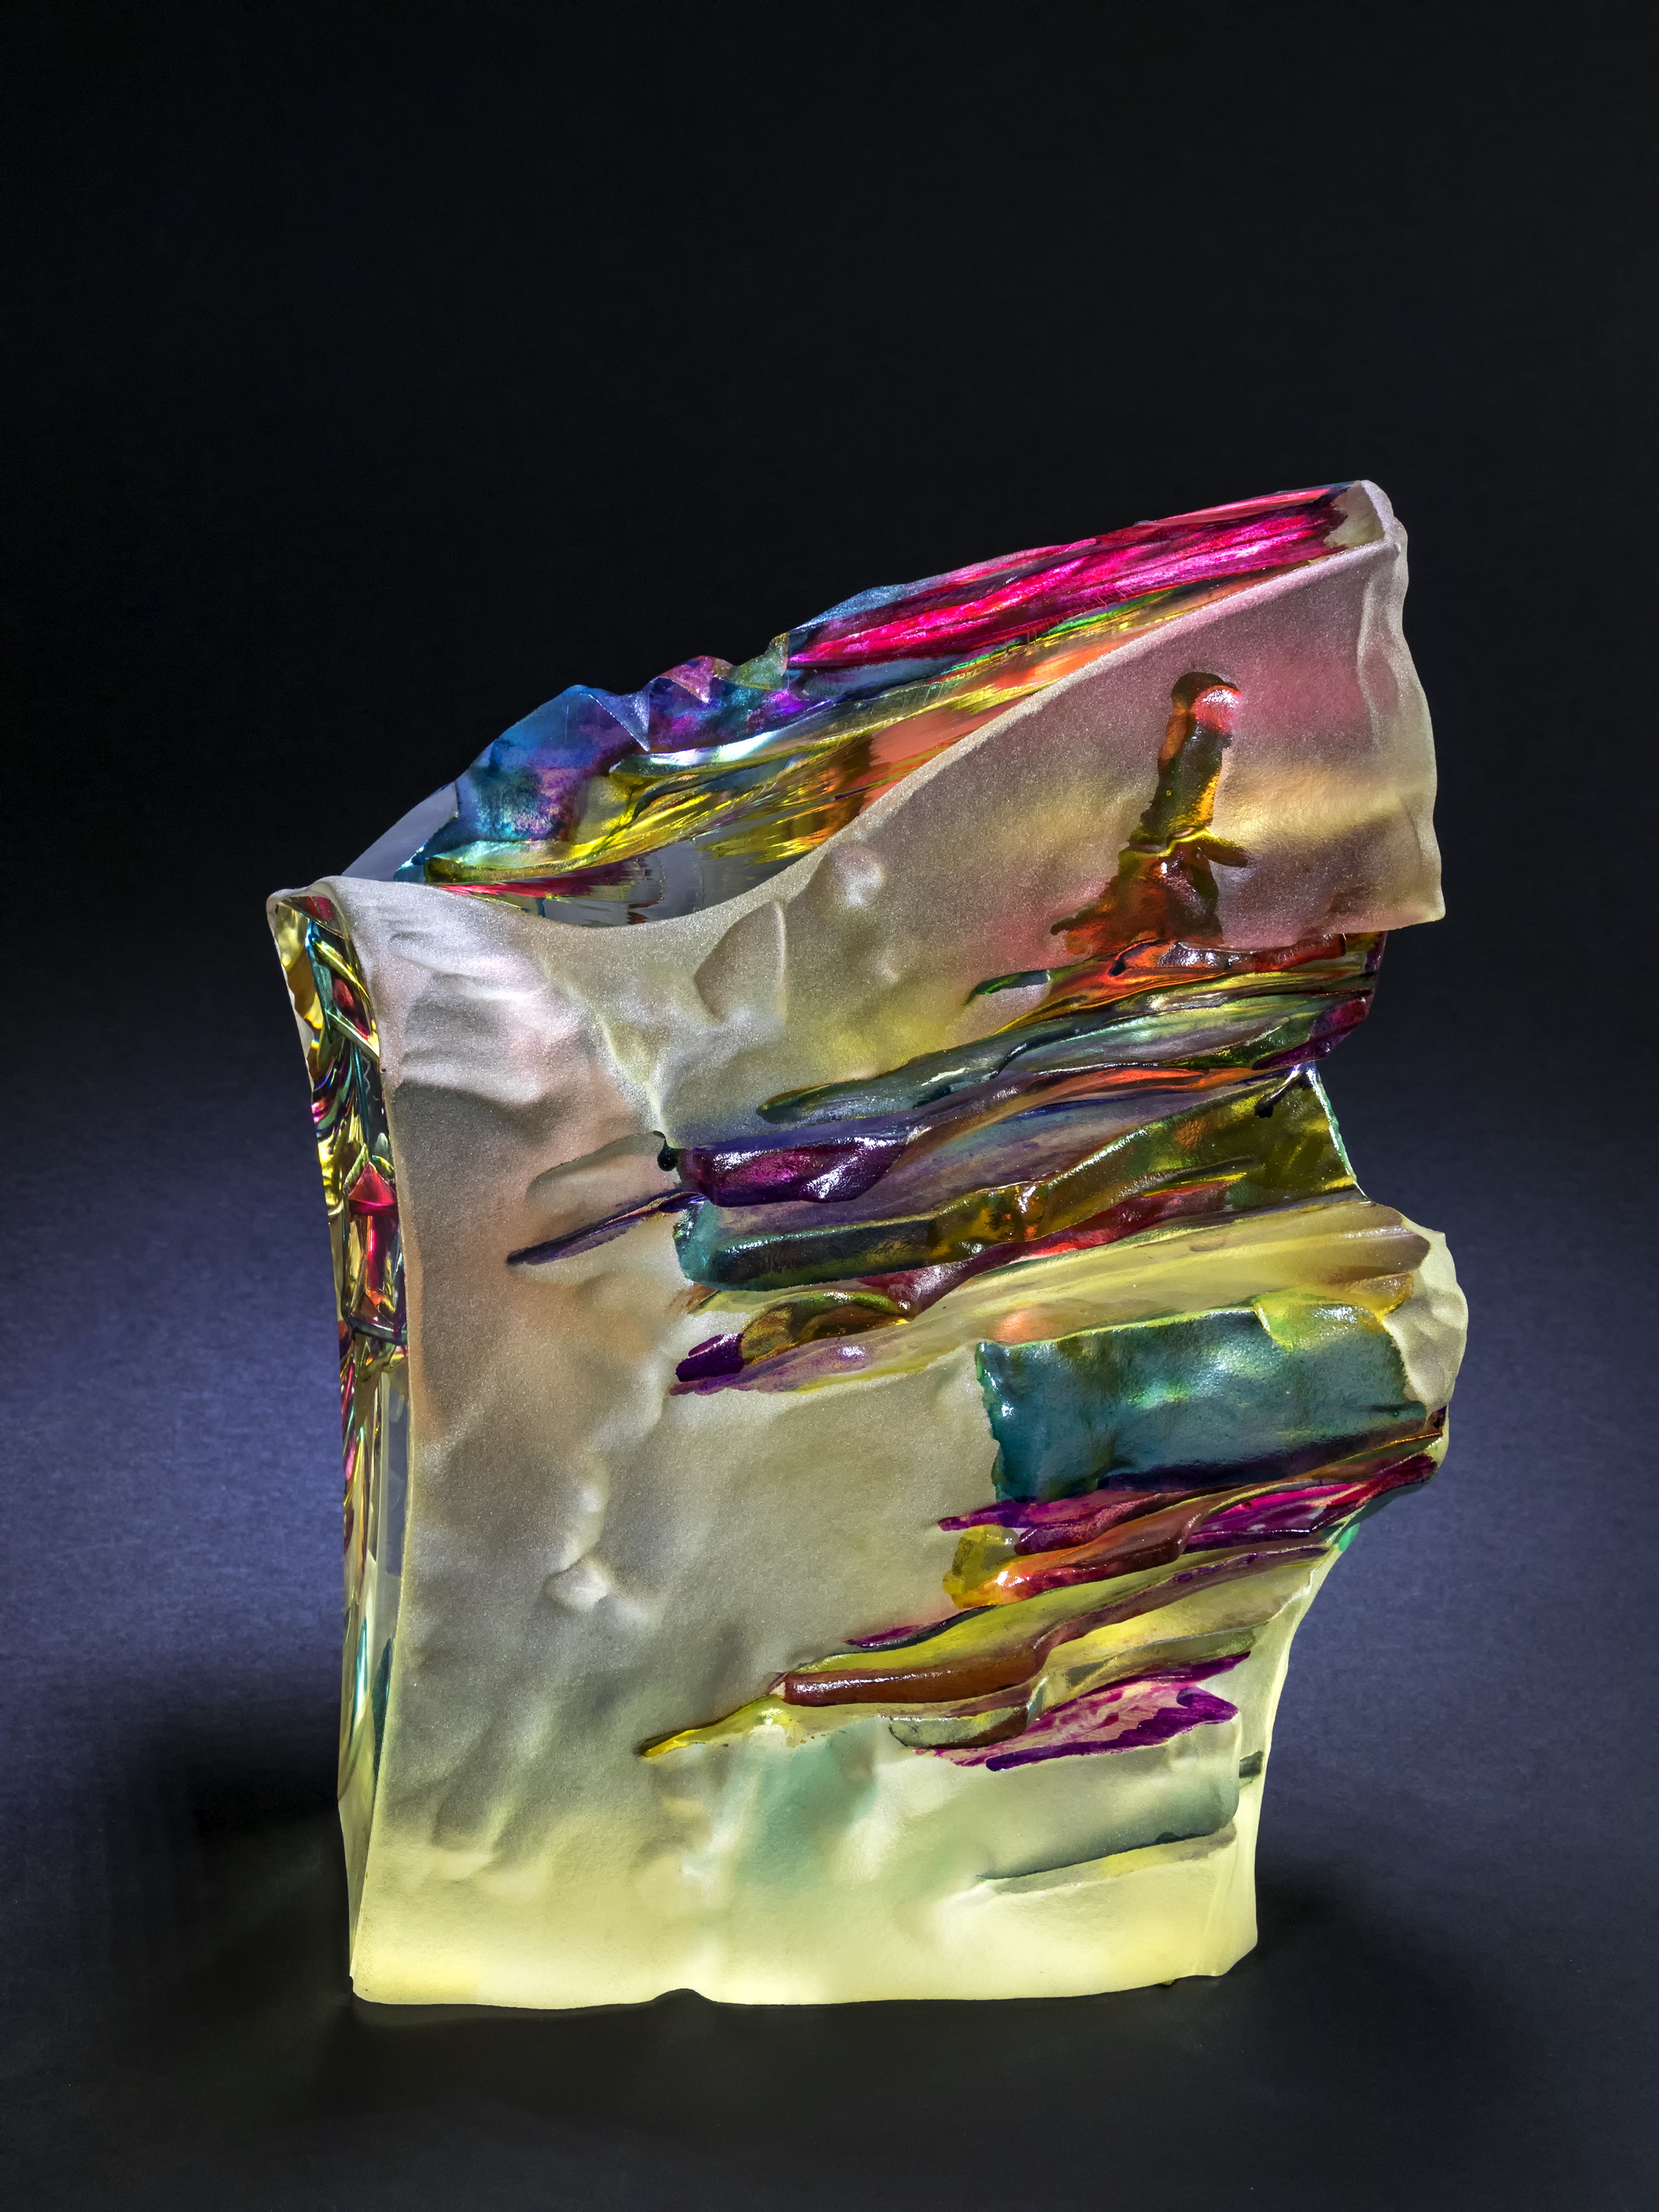 Tetev, Czeslaw Zuber, Polish b. 1948, glass block, cut, enameled and etched, 1986, Gift of Donald and Carol Wiiken